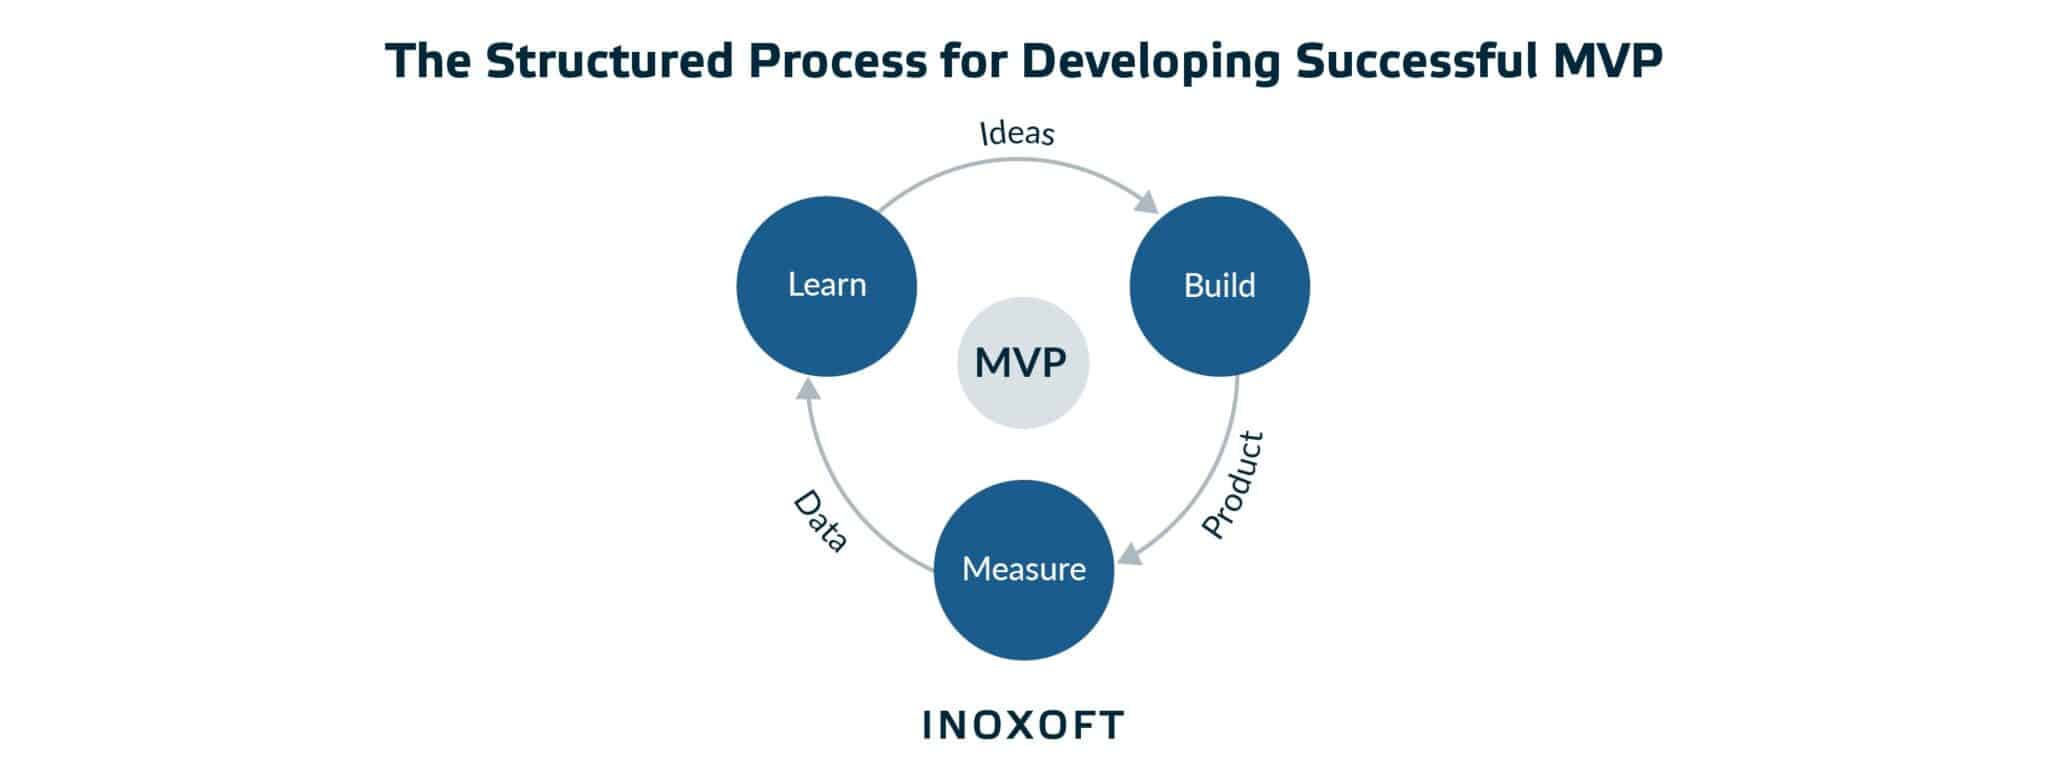 The Structured Process for Developing Successful MVP